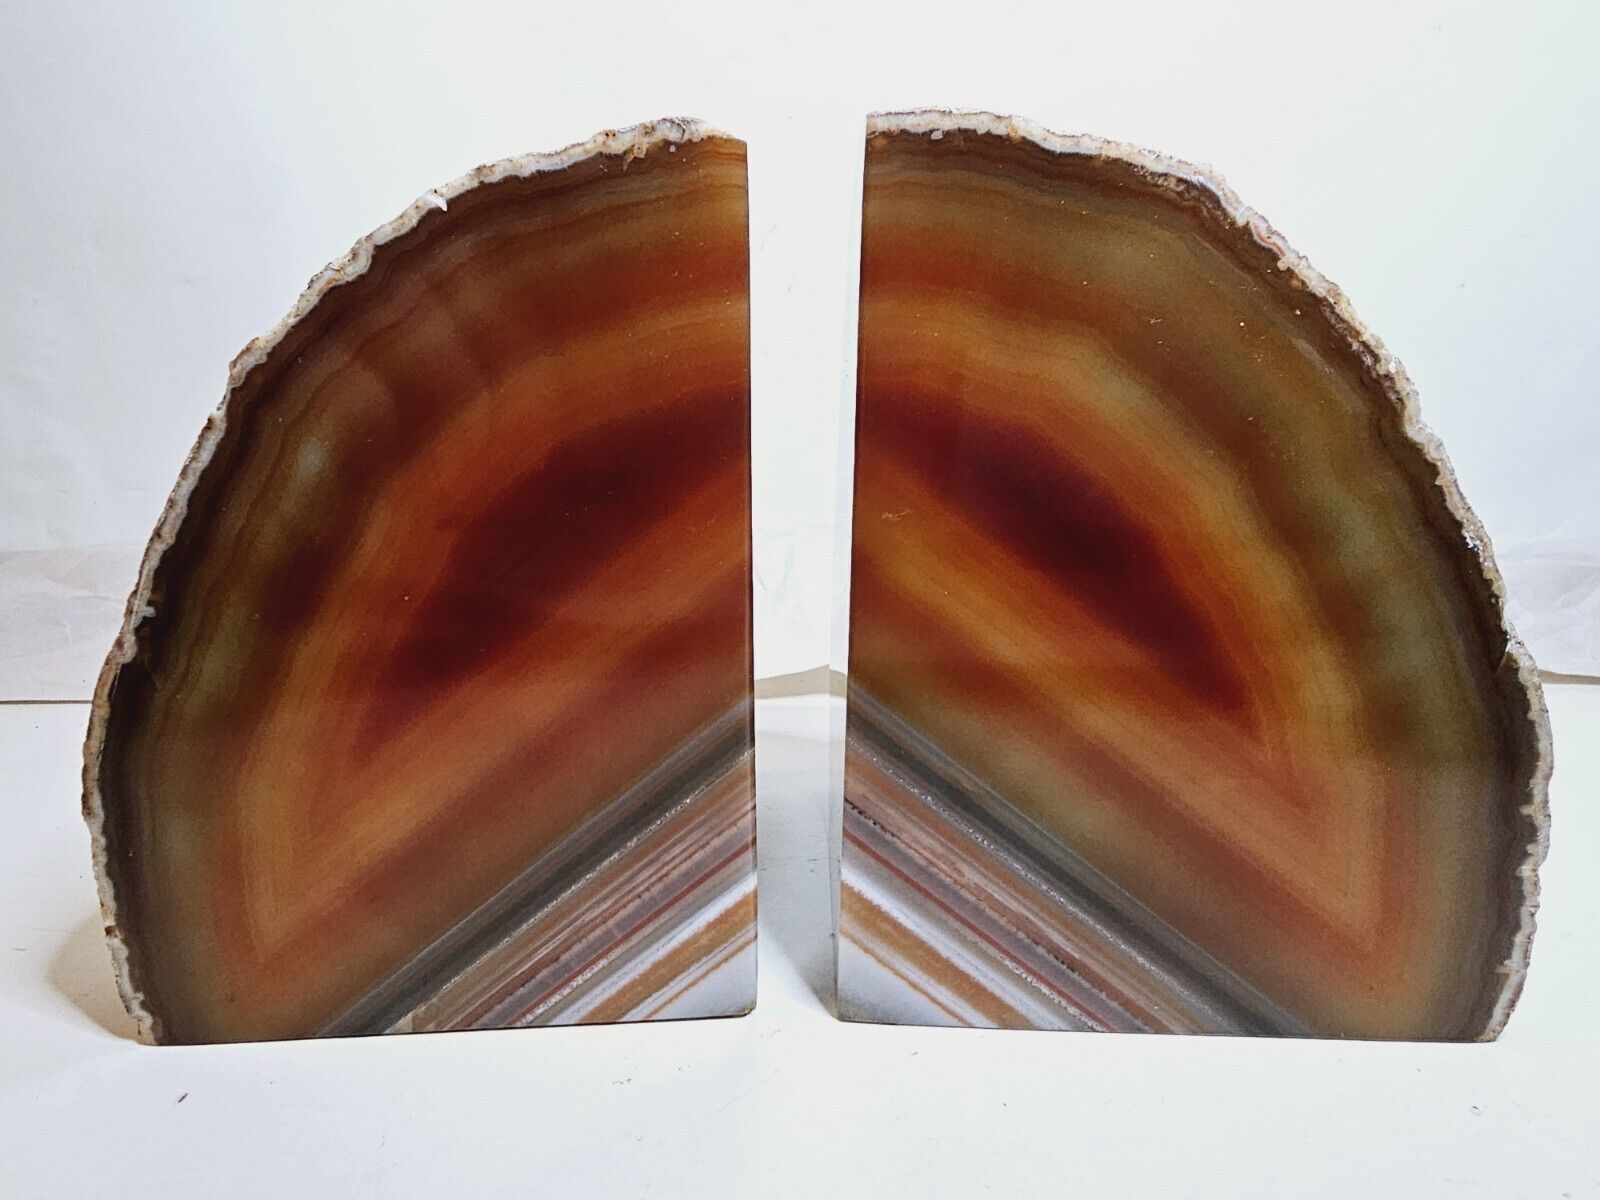 BEAUTIFUL BRAZILIAN AGATE BOOKENDS CRYSTAL GEODE DISPLAY RED AGATE LAYERS